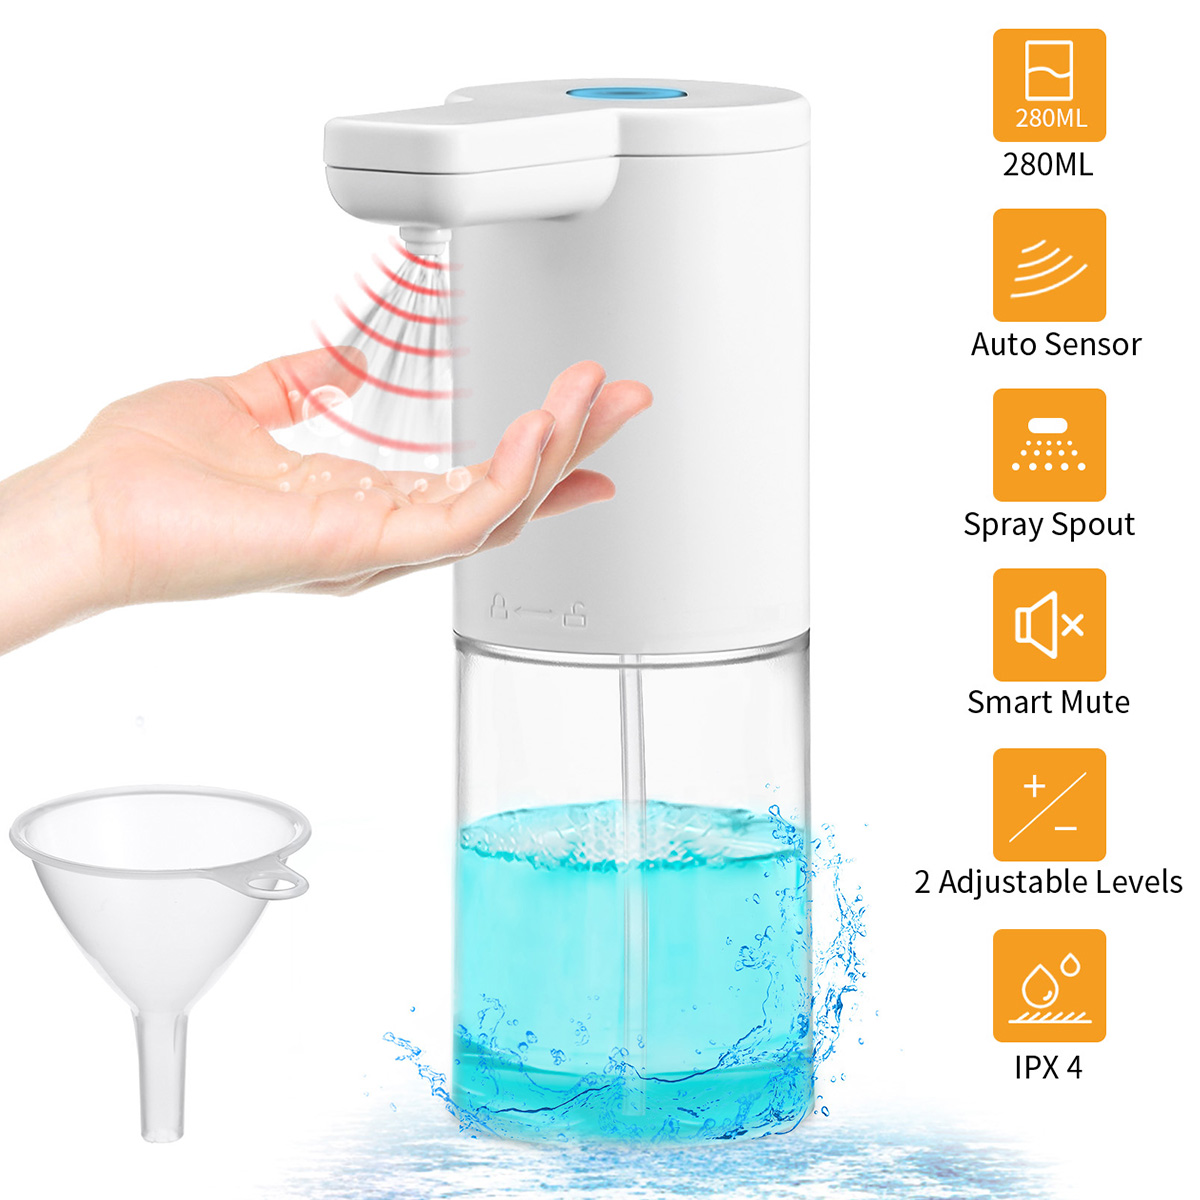 KING-DO-WAY-280ml-Automatic-Contactless-Soap-Dispenser-280ml-Smart-Touchless-Soap-Disinfectant-Dispe-1890640-1